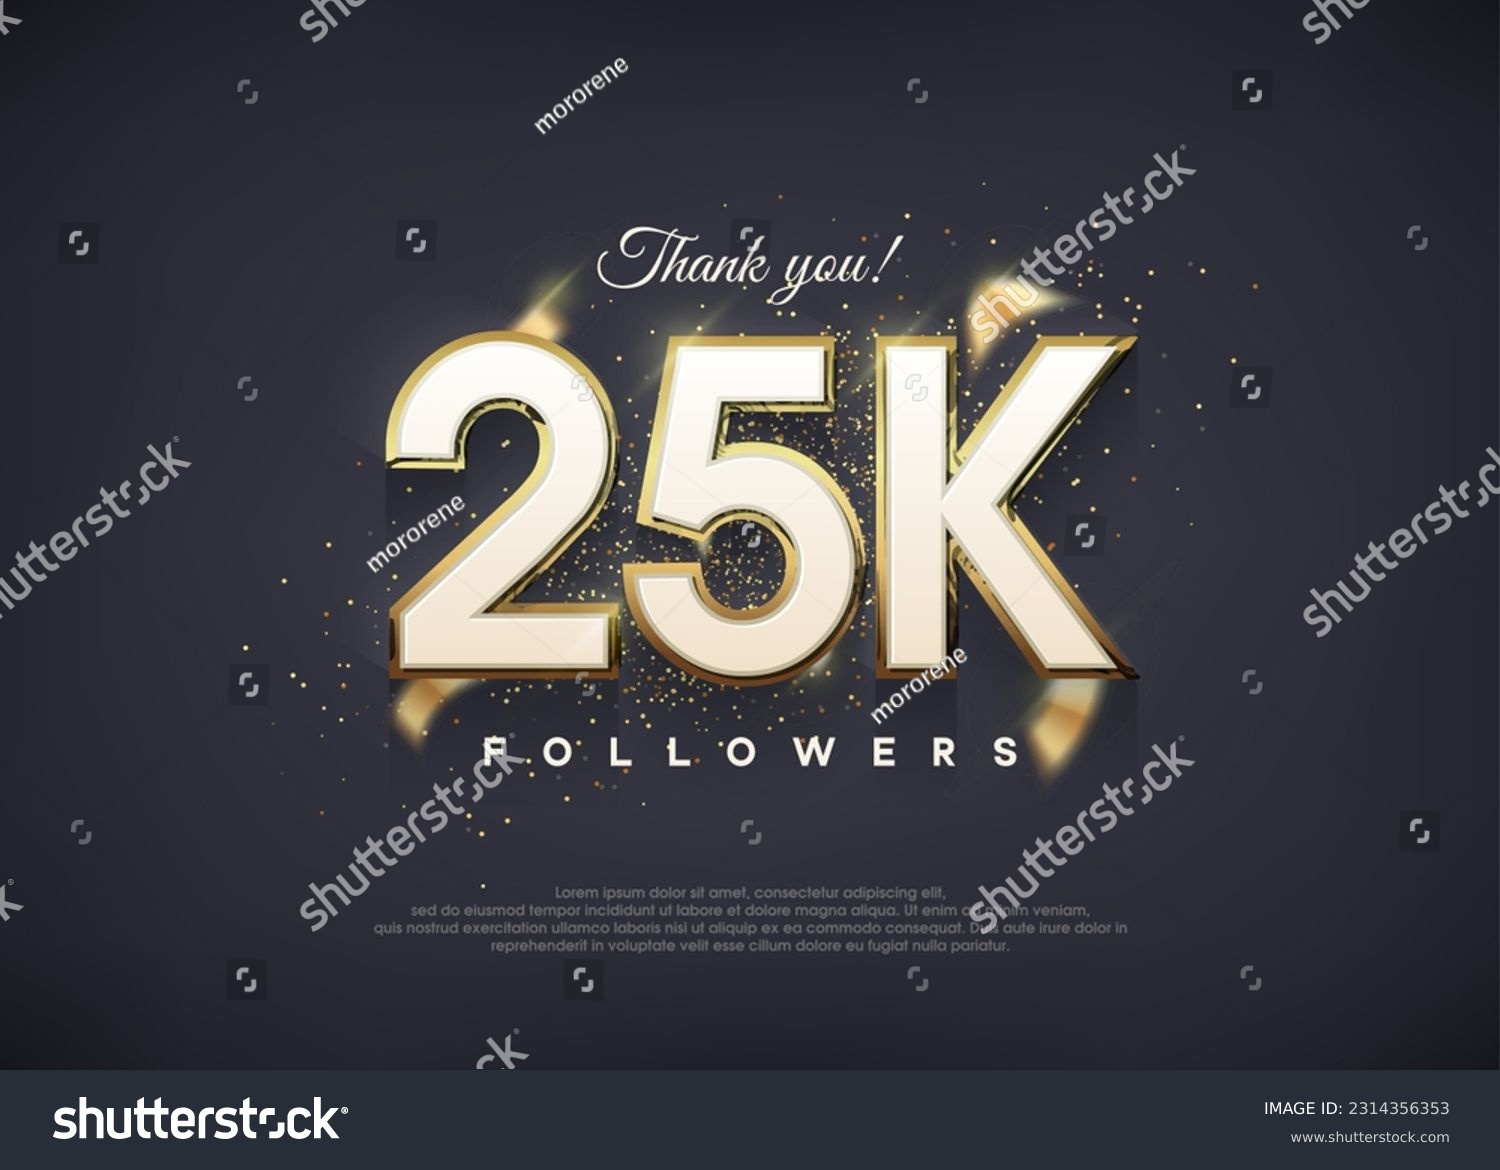 SVG of A luxurious 25k figure for thanking followers. svg